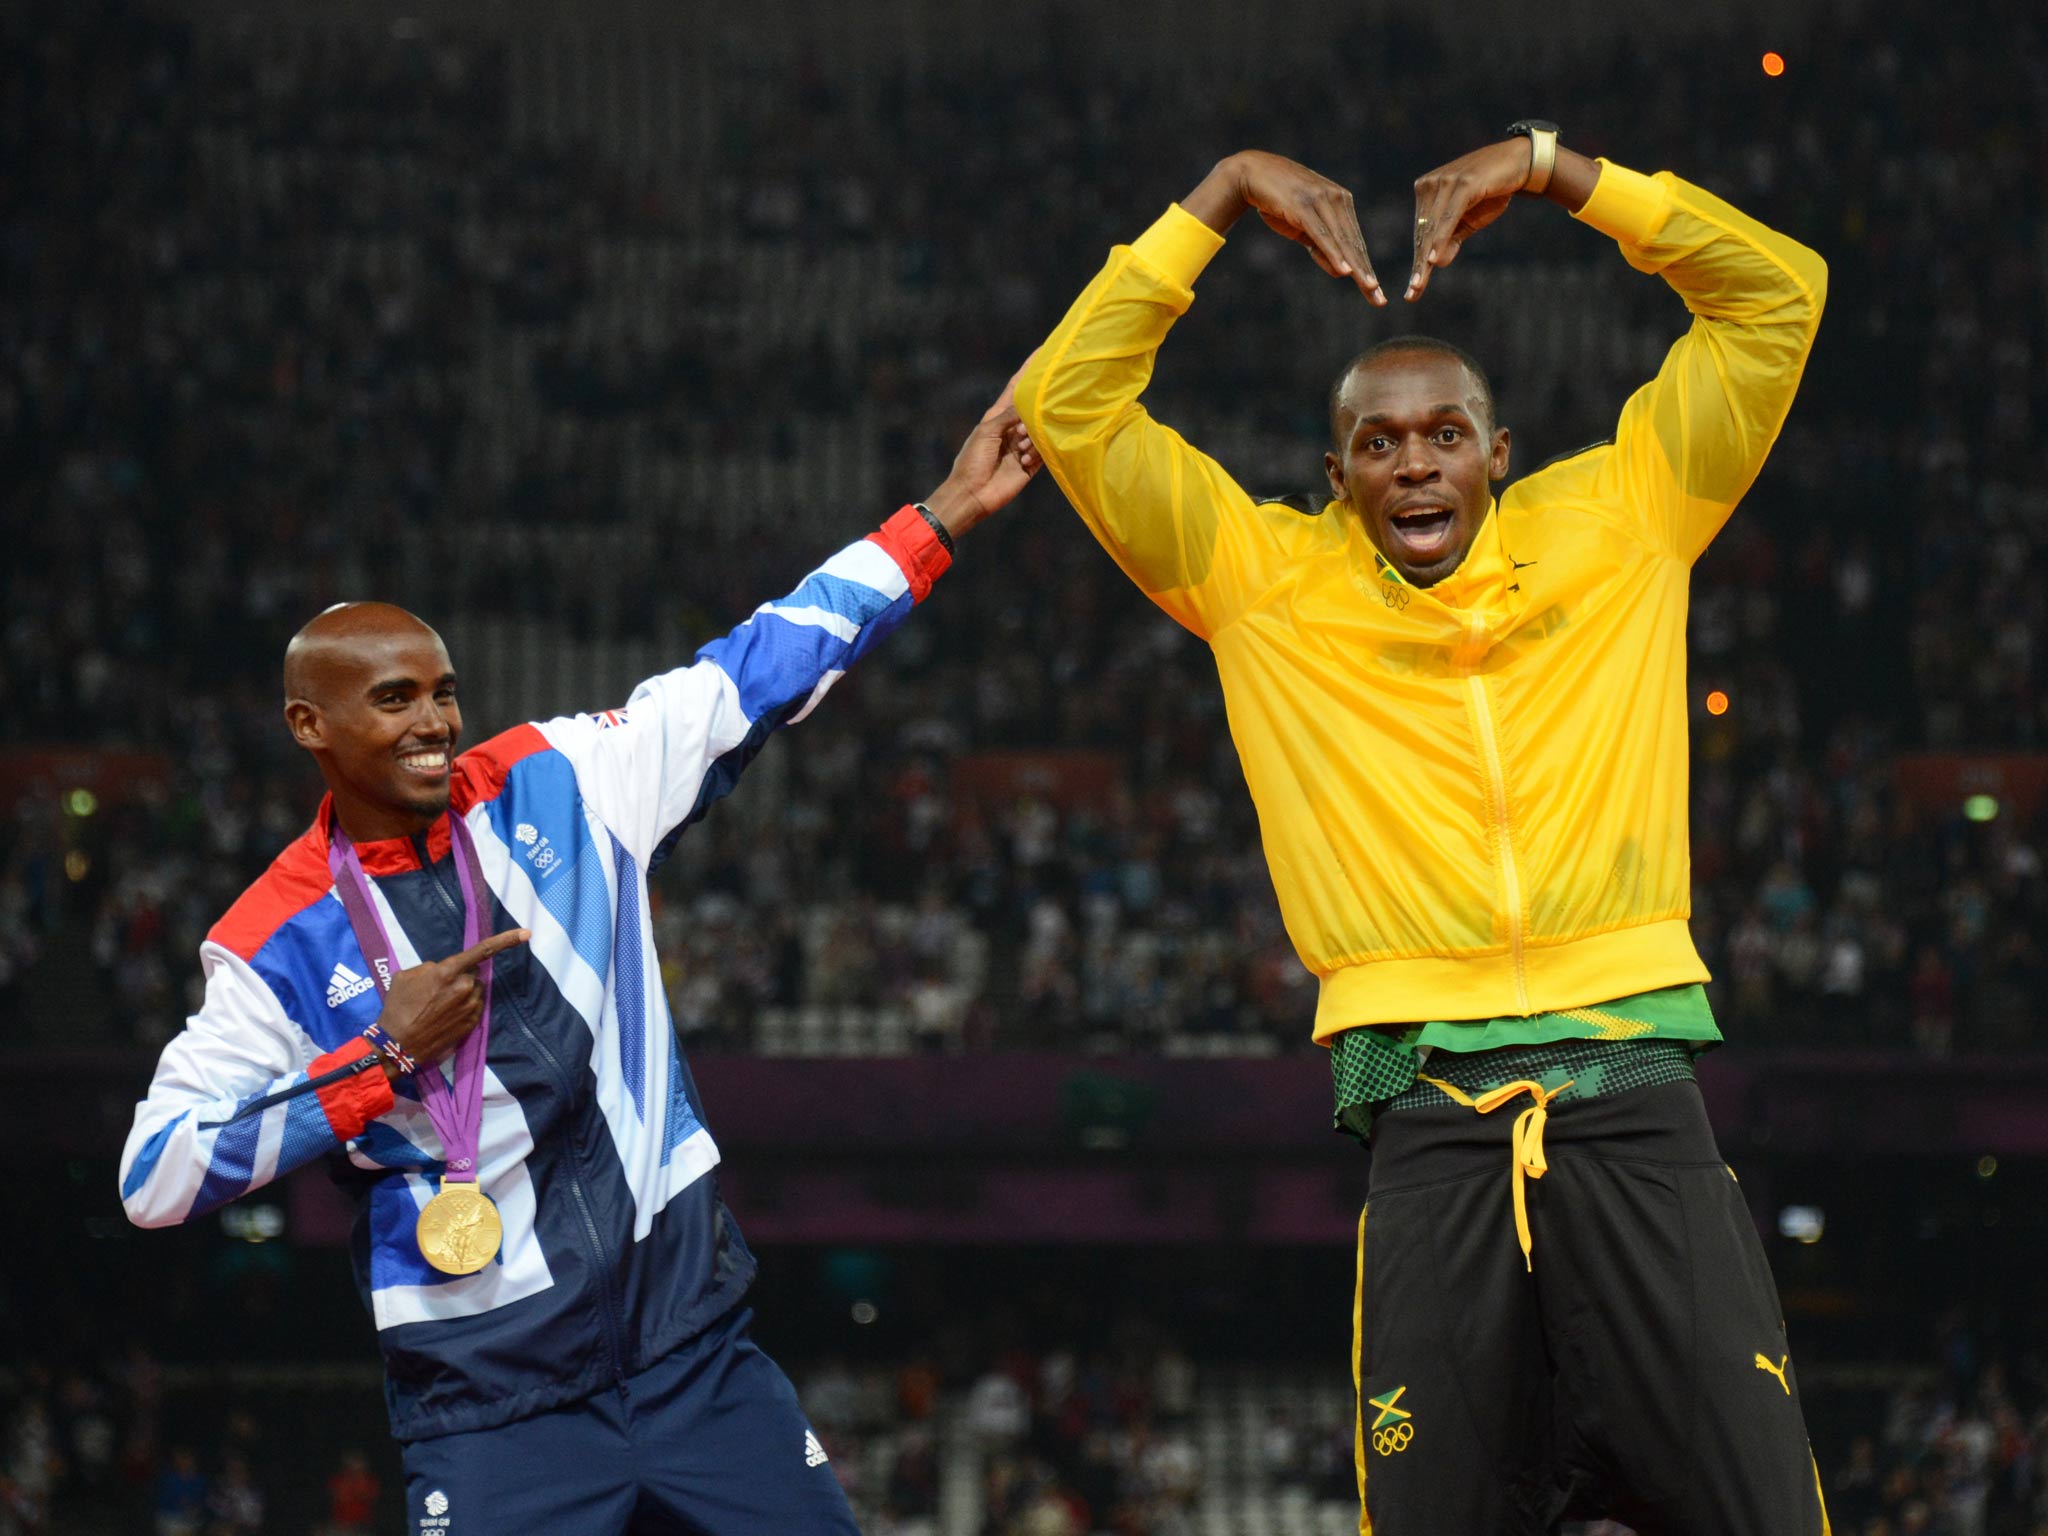 Usain Bolt and Mo Farah pictured at London 2012